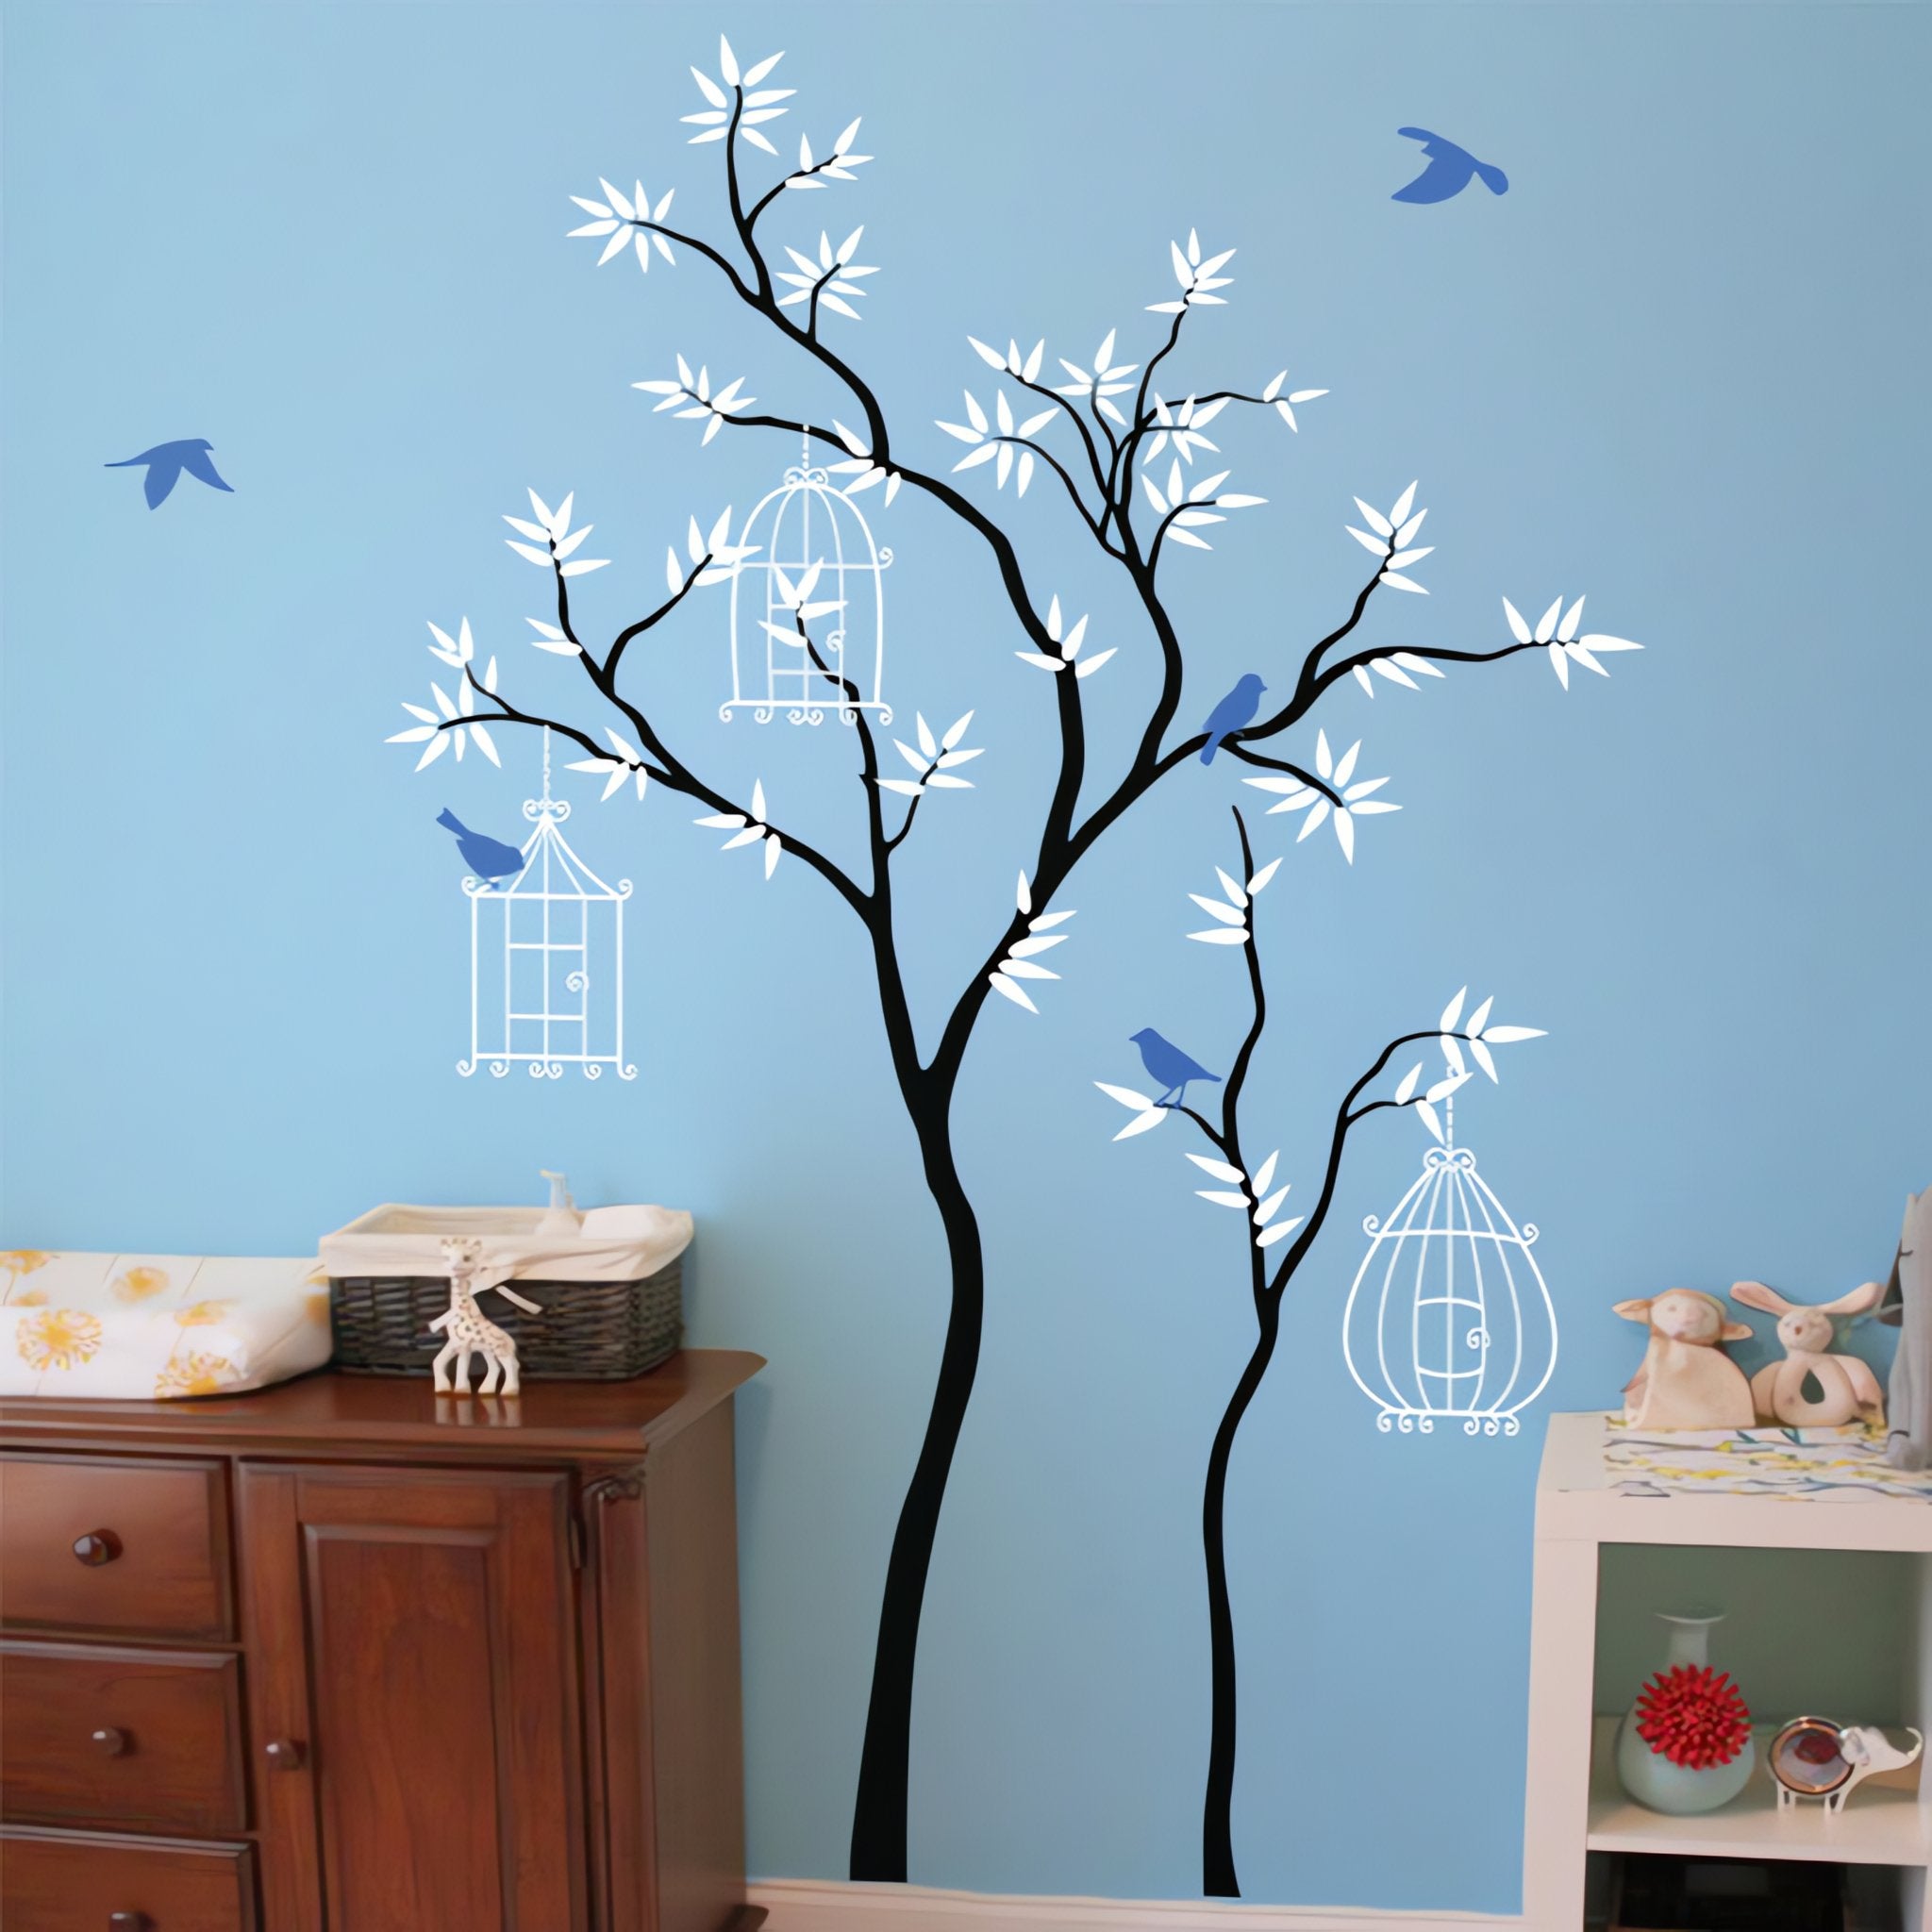 Tree wall sticker with birds and birdcages in a bedroom next to a dresser and shelf.